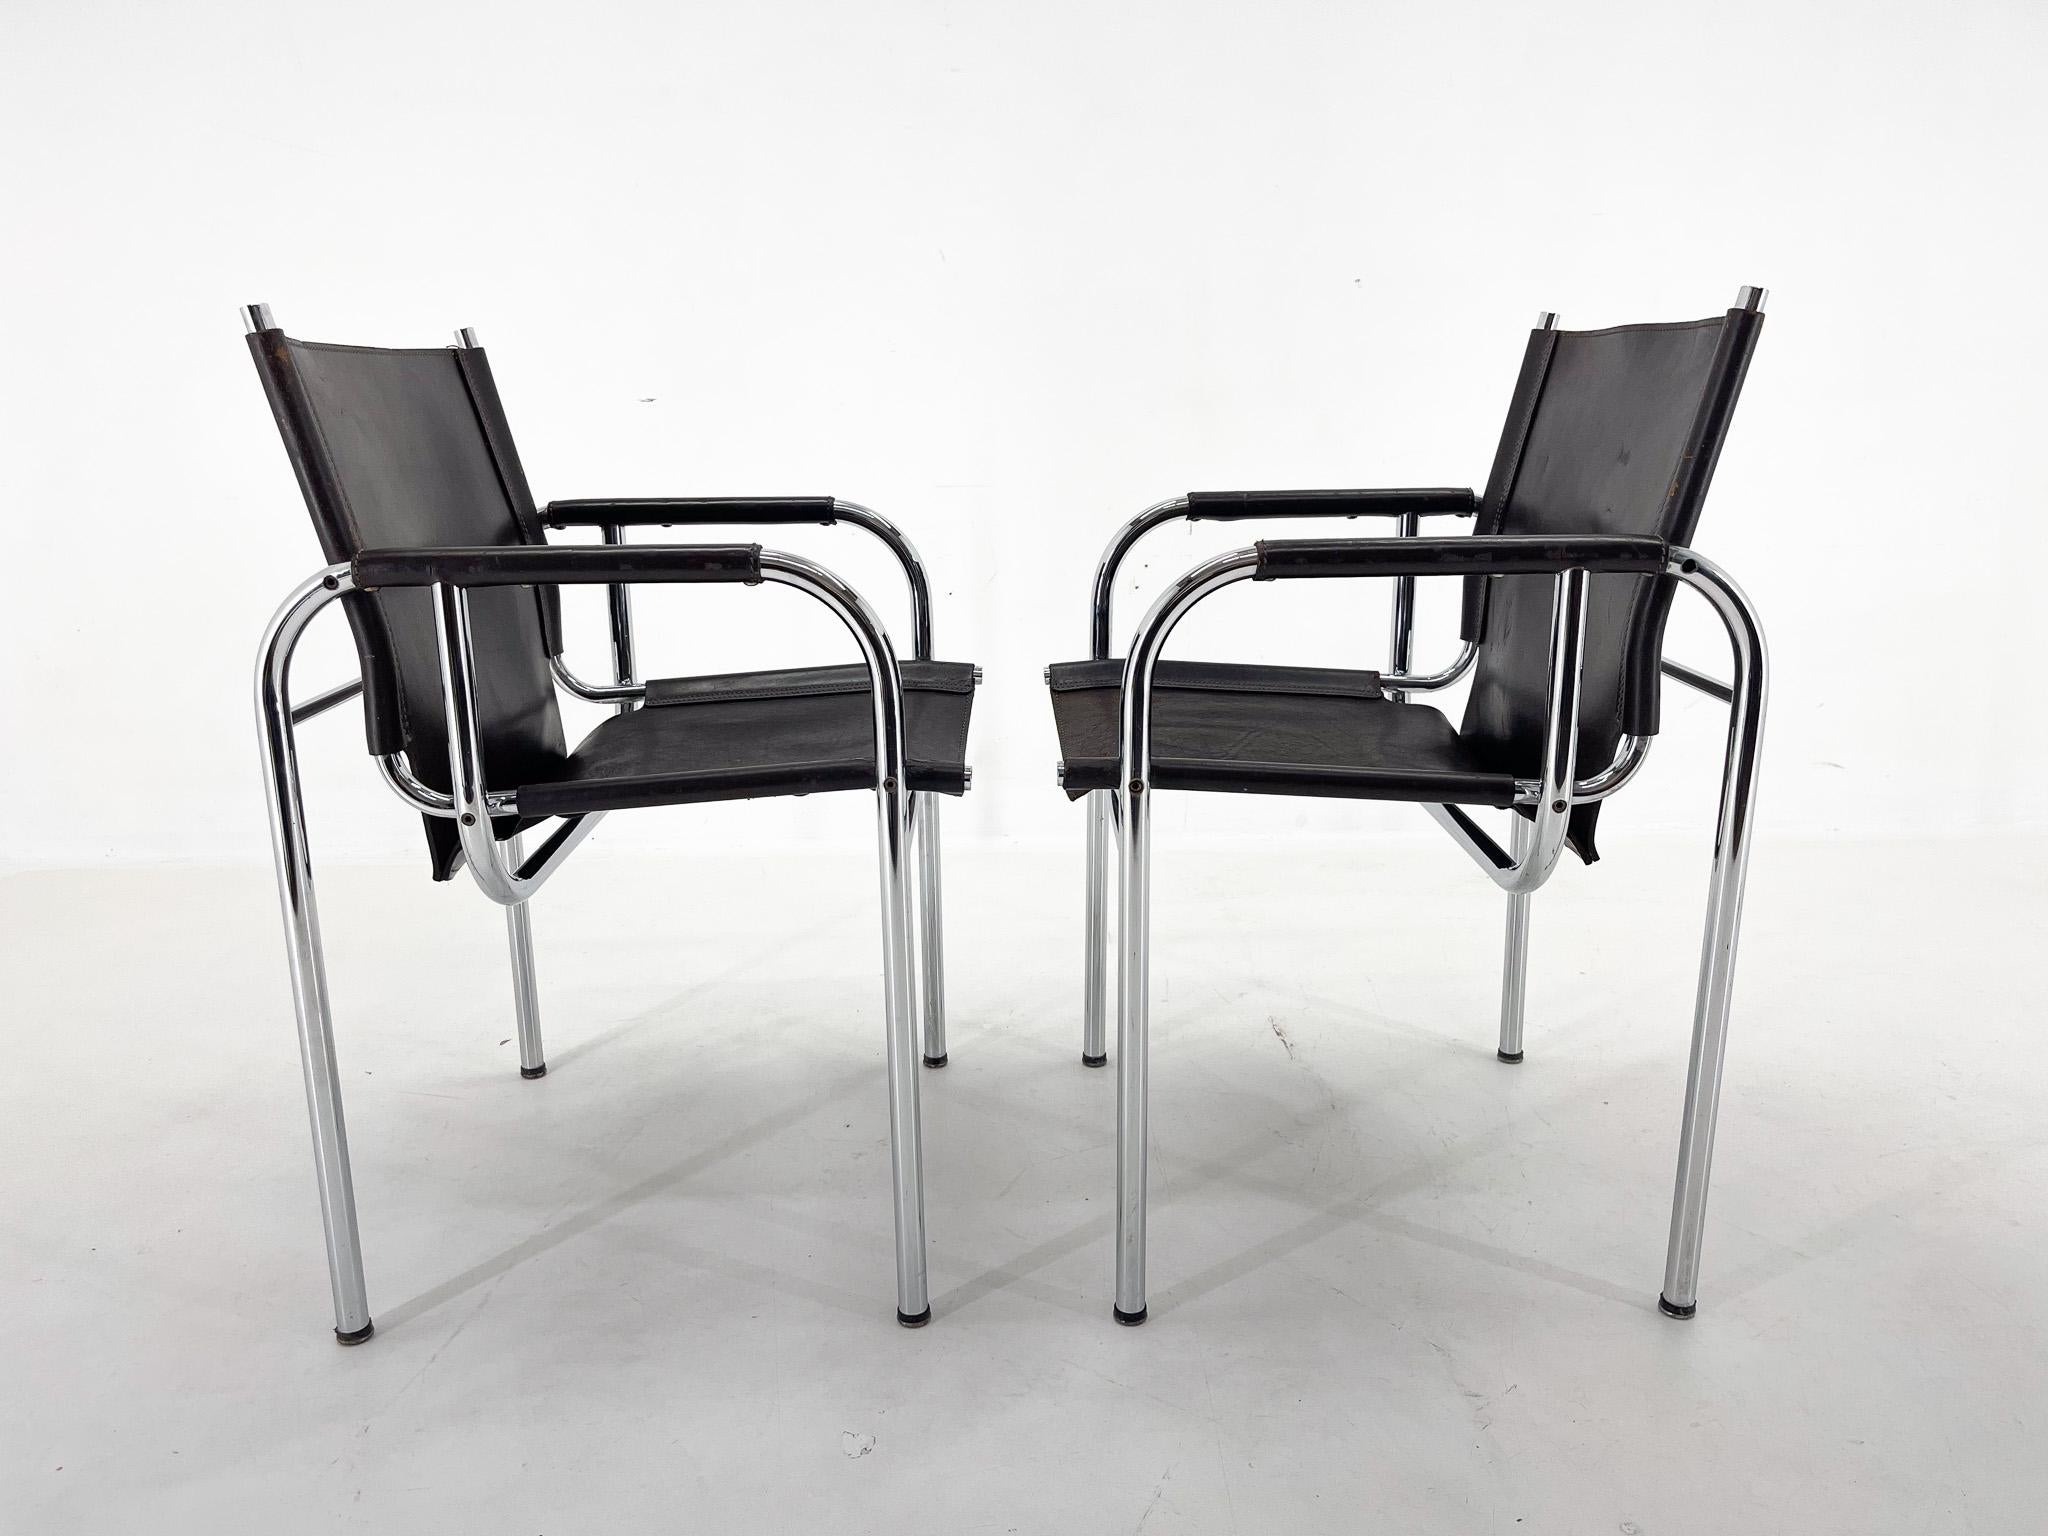 Set of two vintage chairs designed by Hans Eichneberger and produced by Strässle International in Switzerland in the 1970's. The chrome parts are in very good condition, the leather shows signs of wear, giving it a beautiful patina.